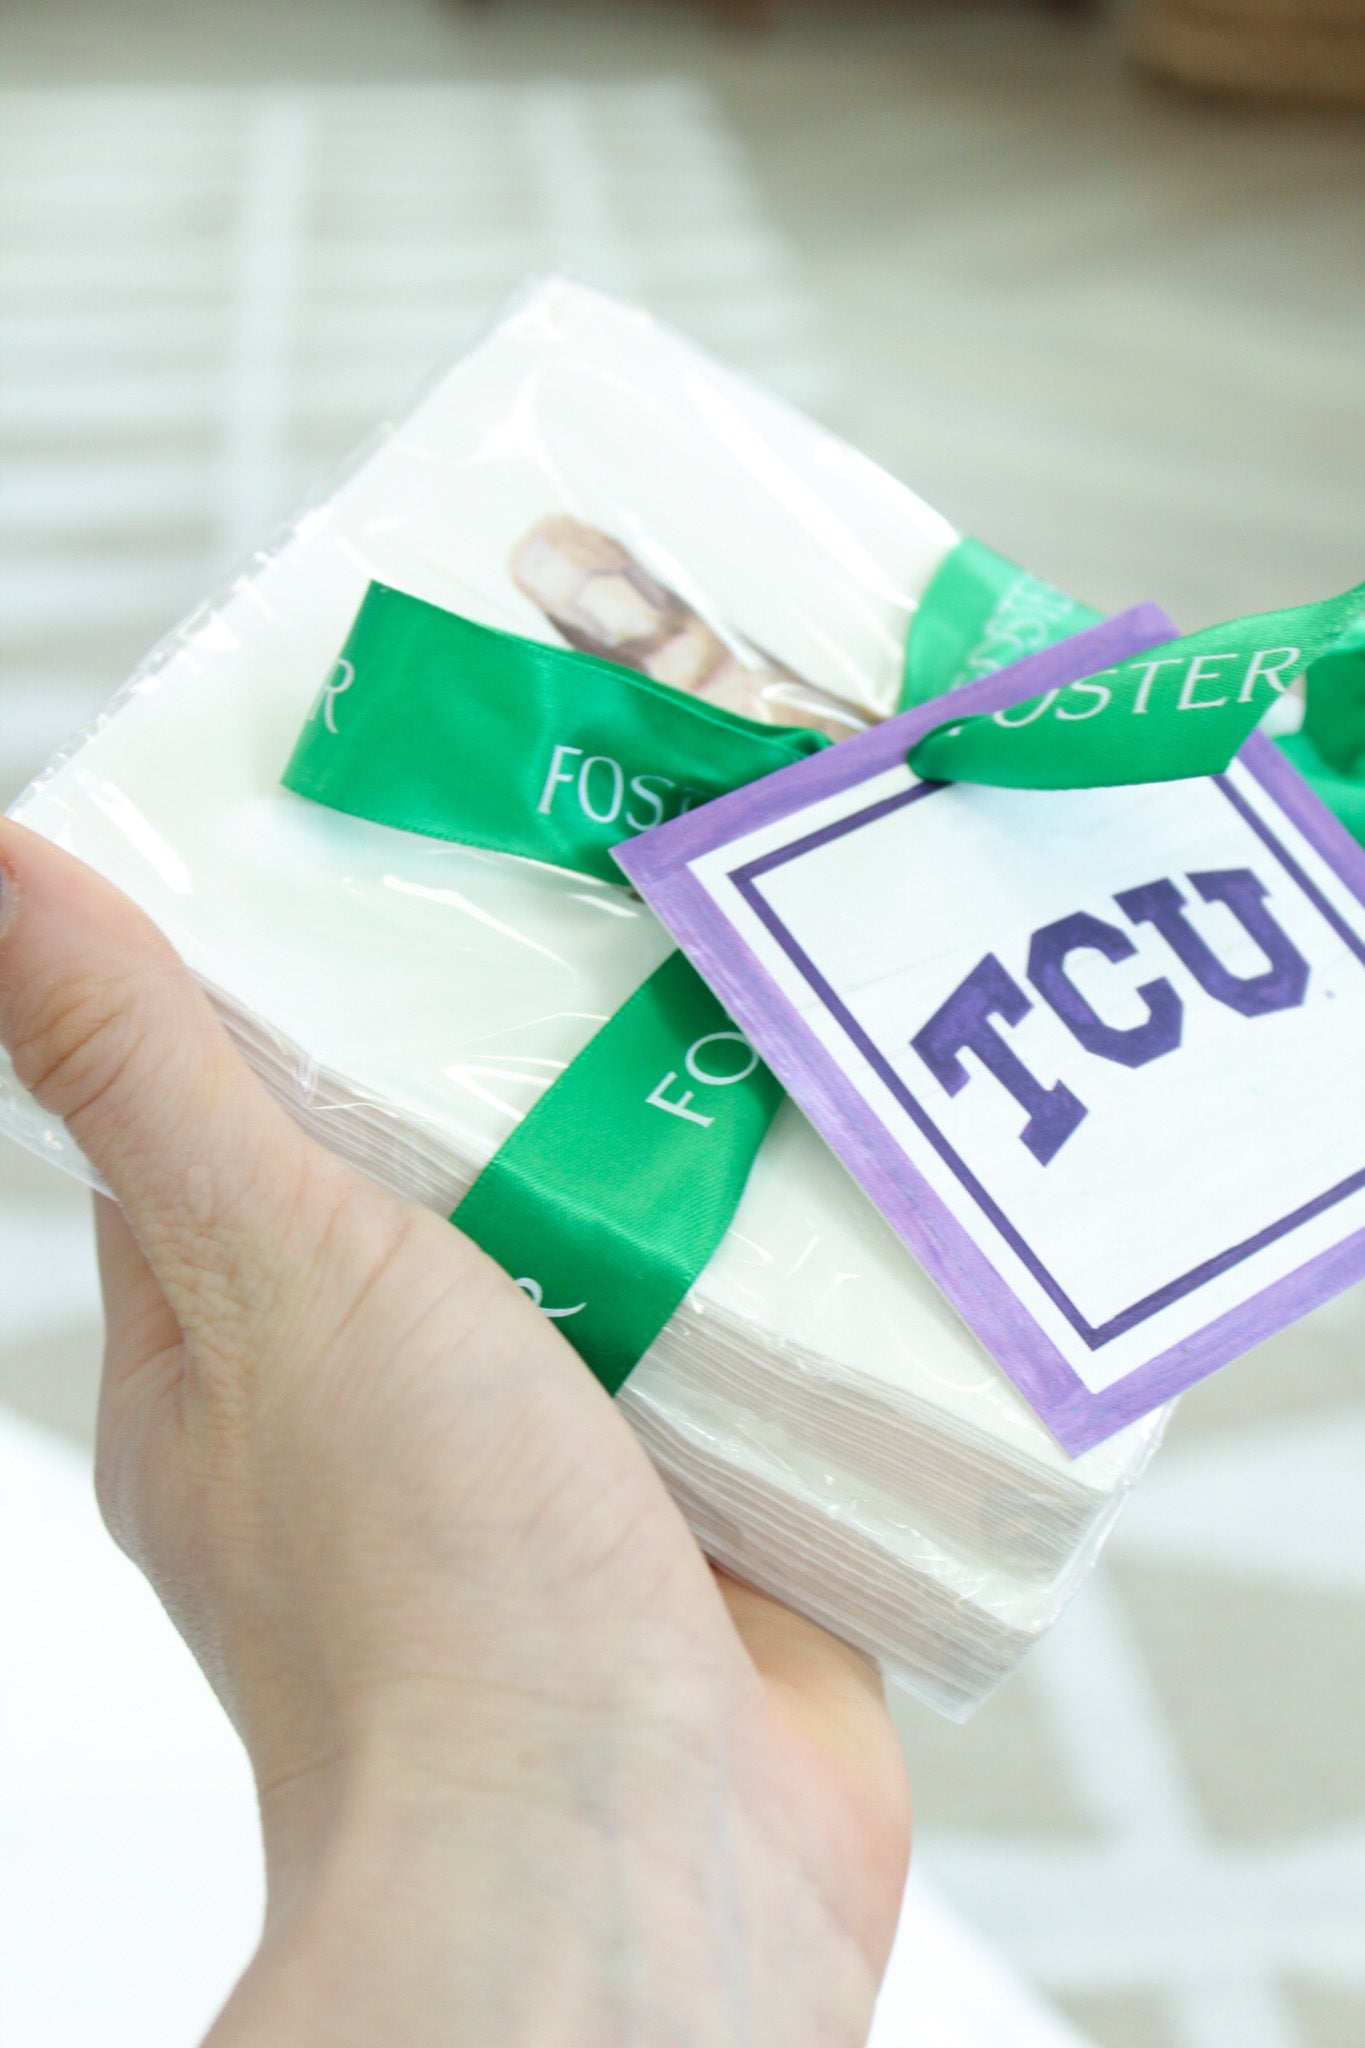 TCU logo gift tags by FOSTER